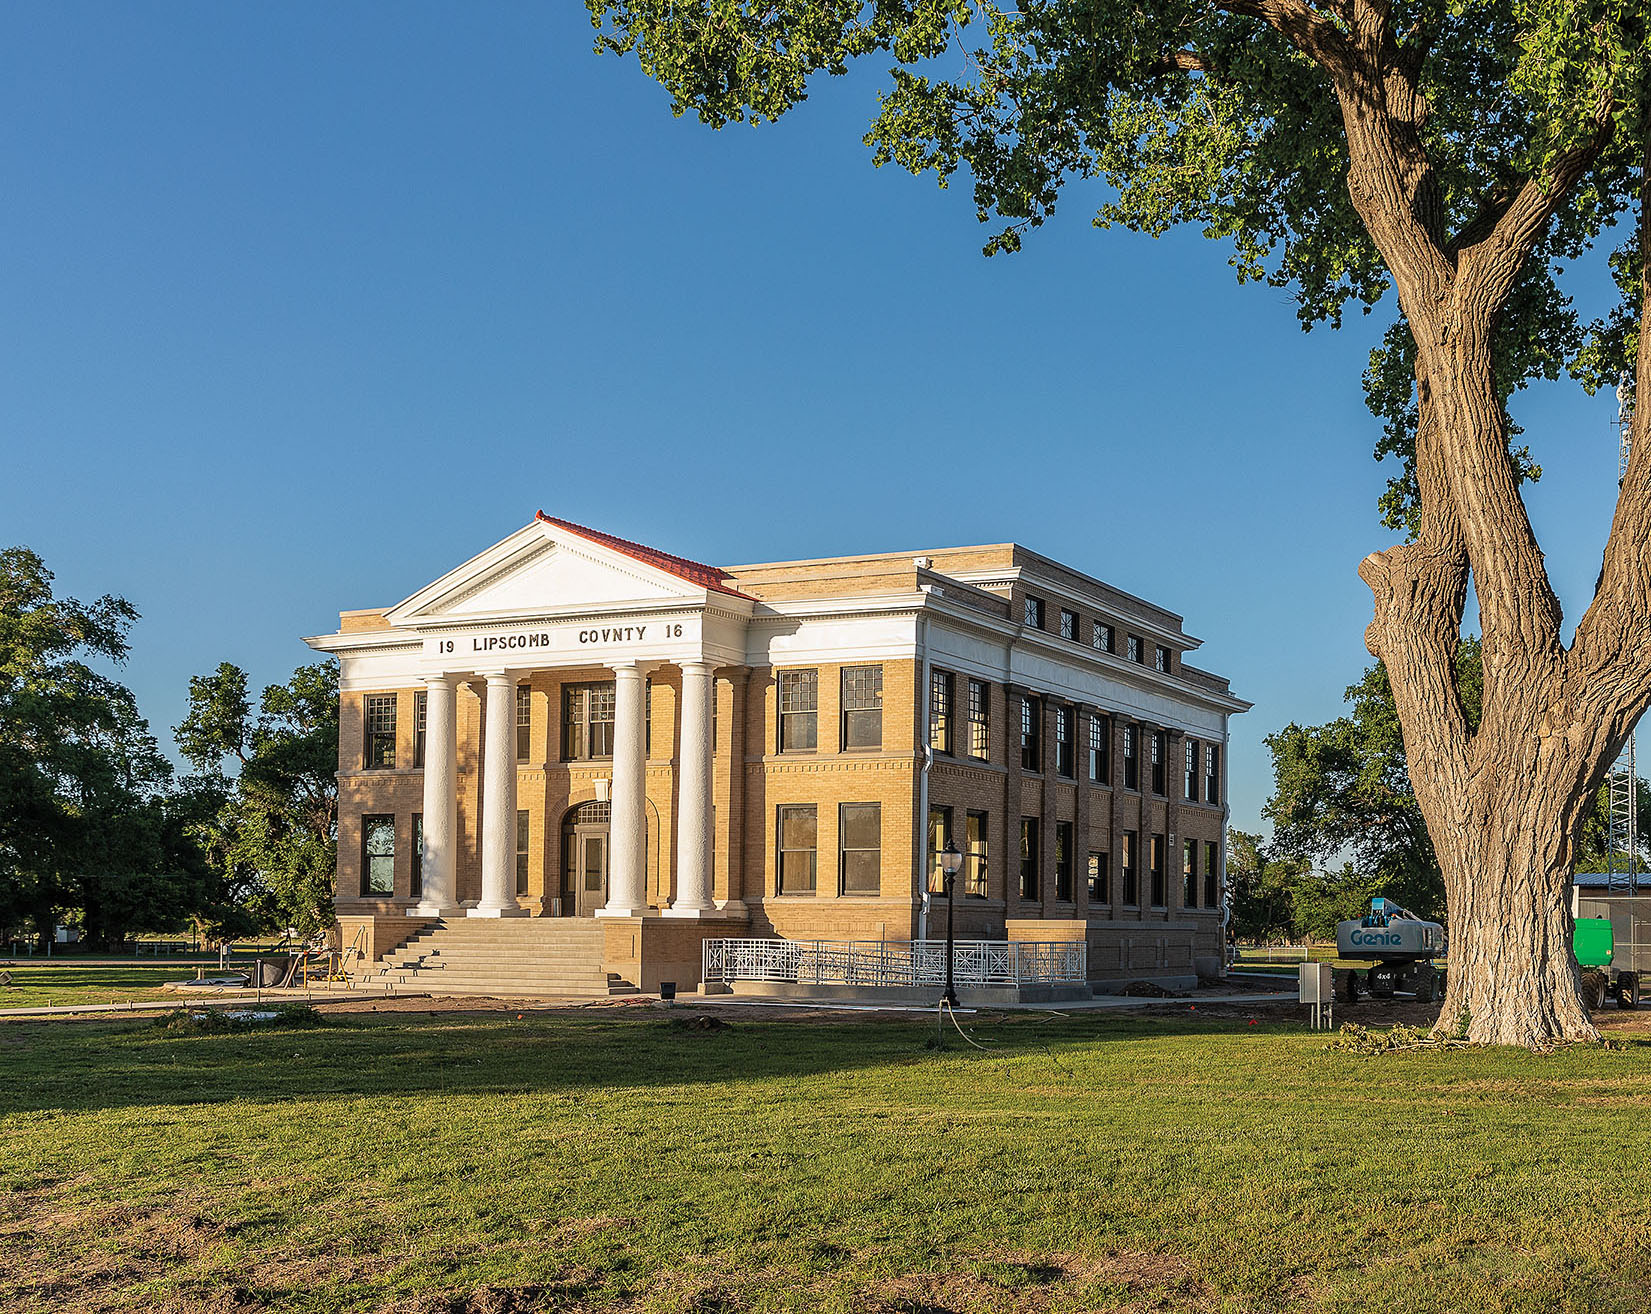 A view of a gold brick courthouse under a tree